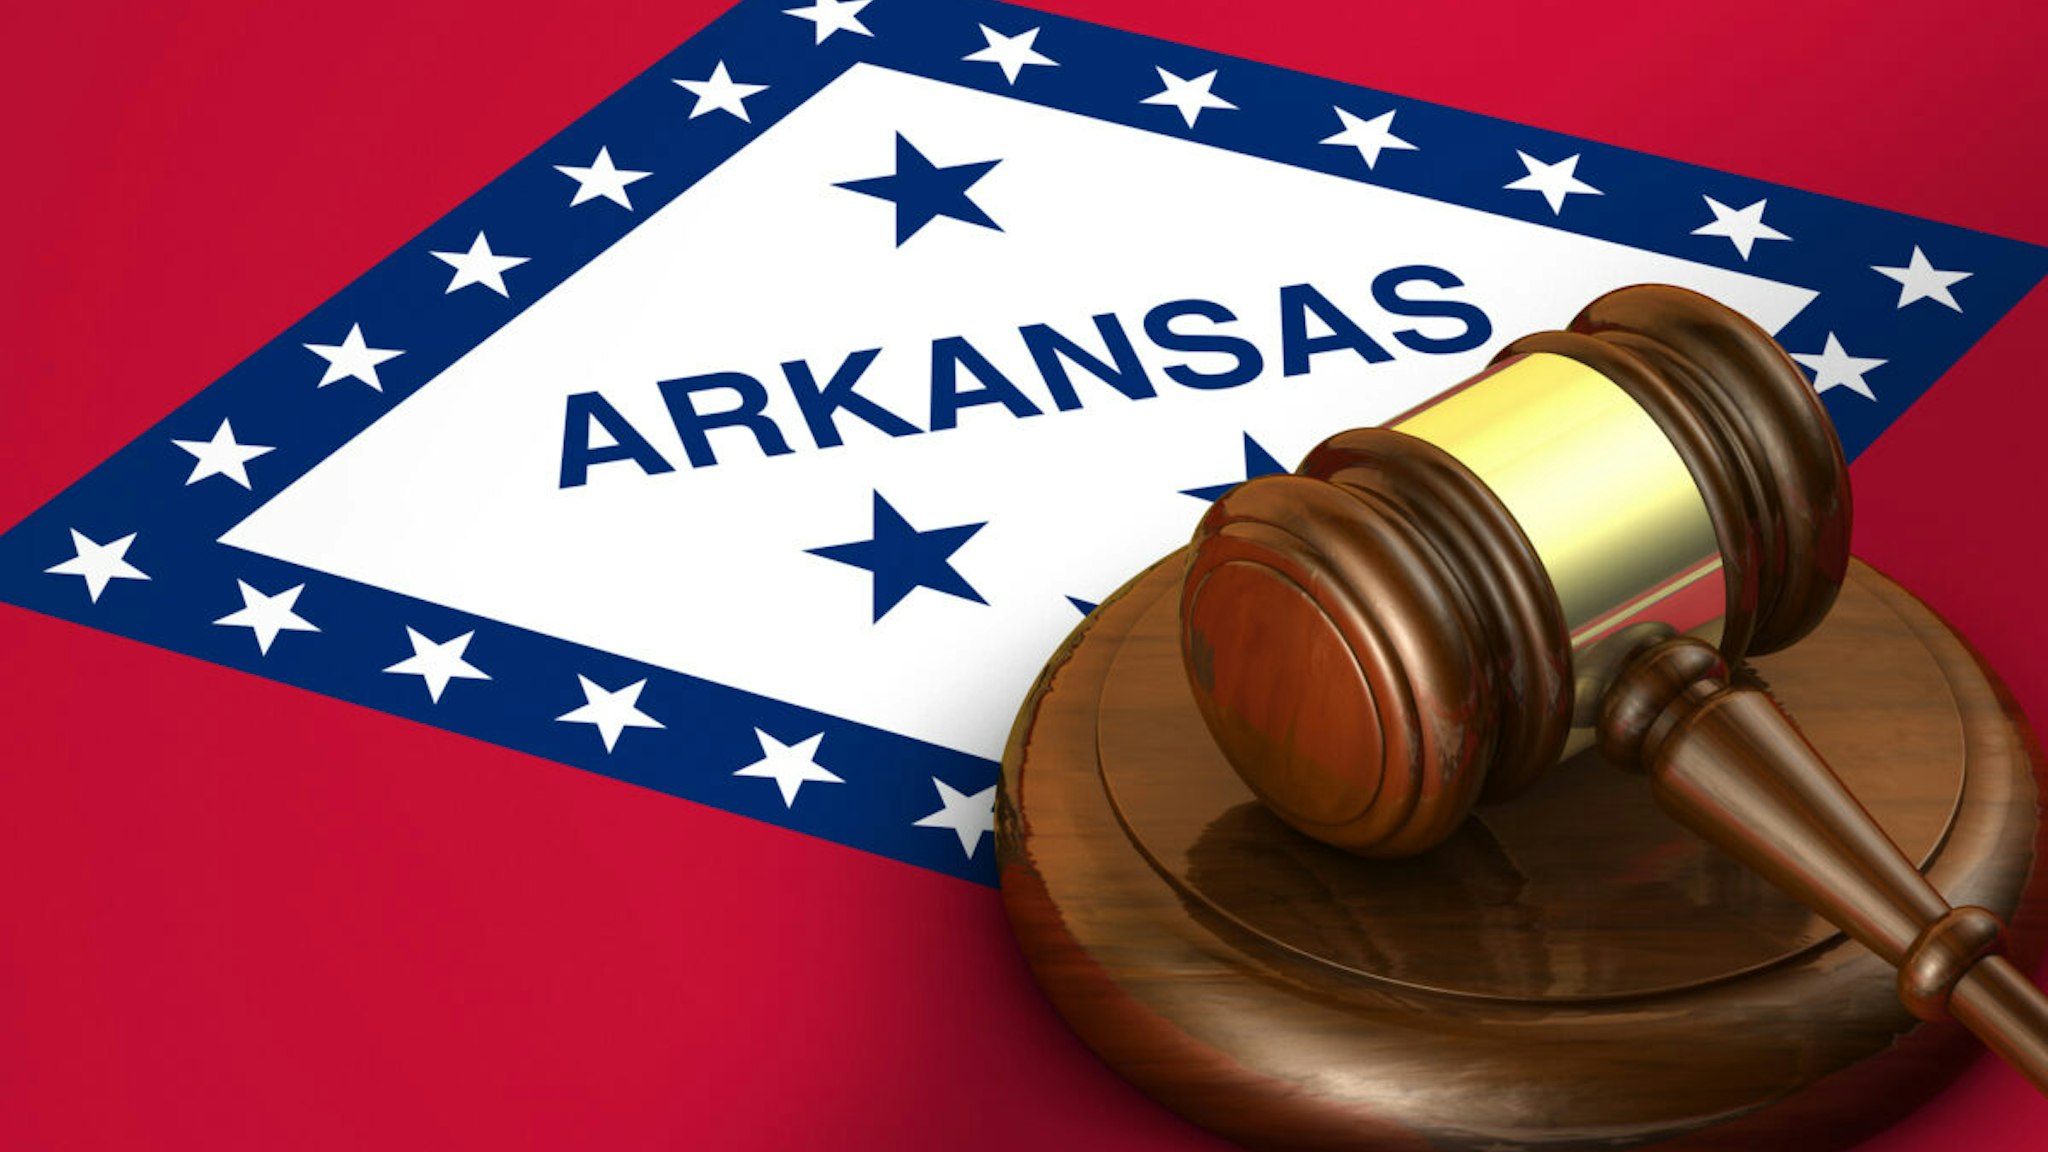 Arkansas US state law, code, legal system and justice concept with a 3d render of a gavel on the Arkansan flag on background.